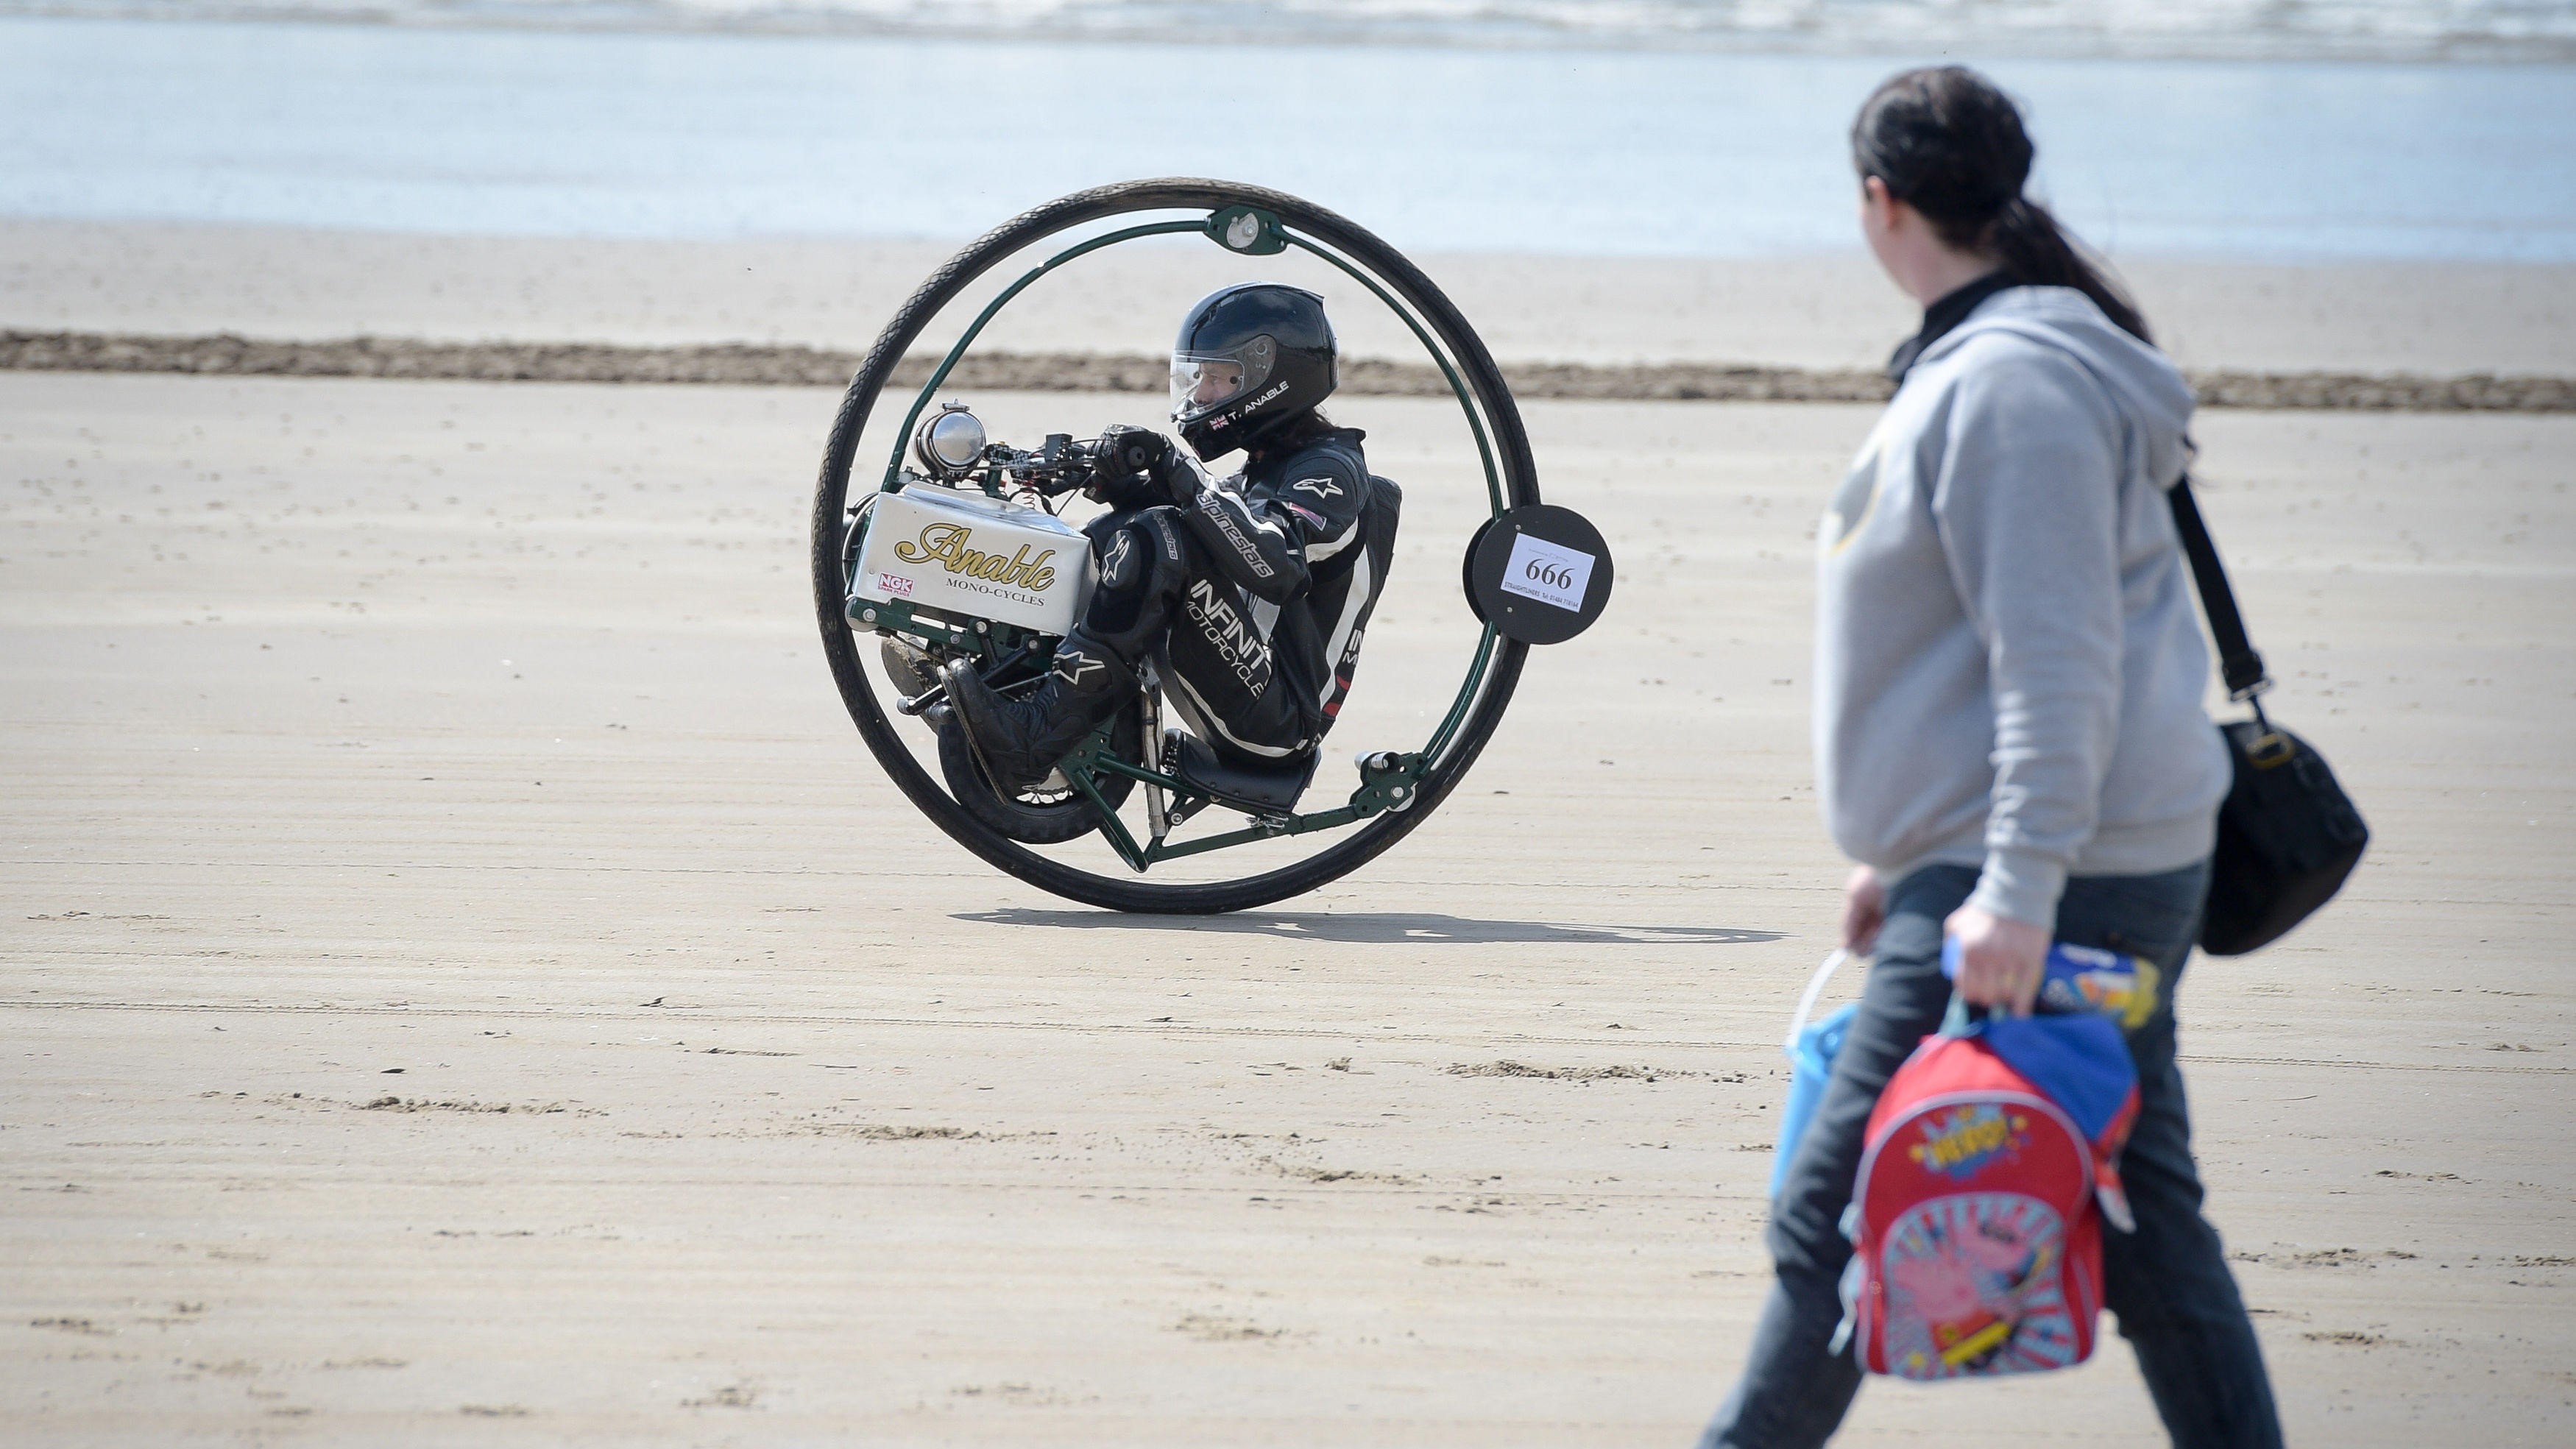 A man practices for a monowheel race in Wales, UK.